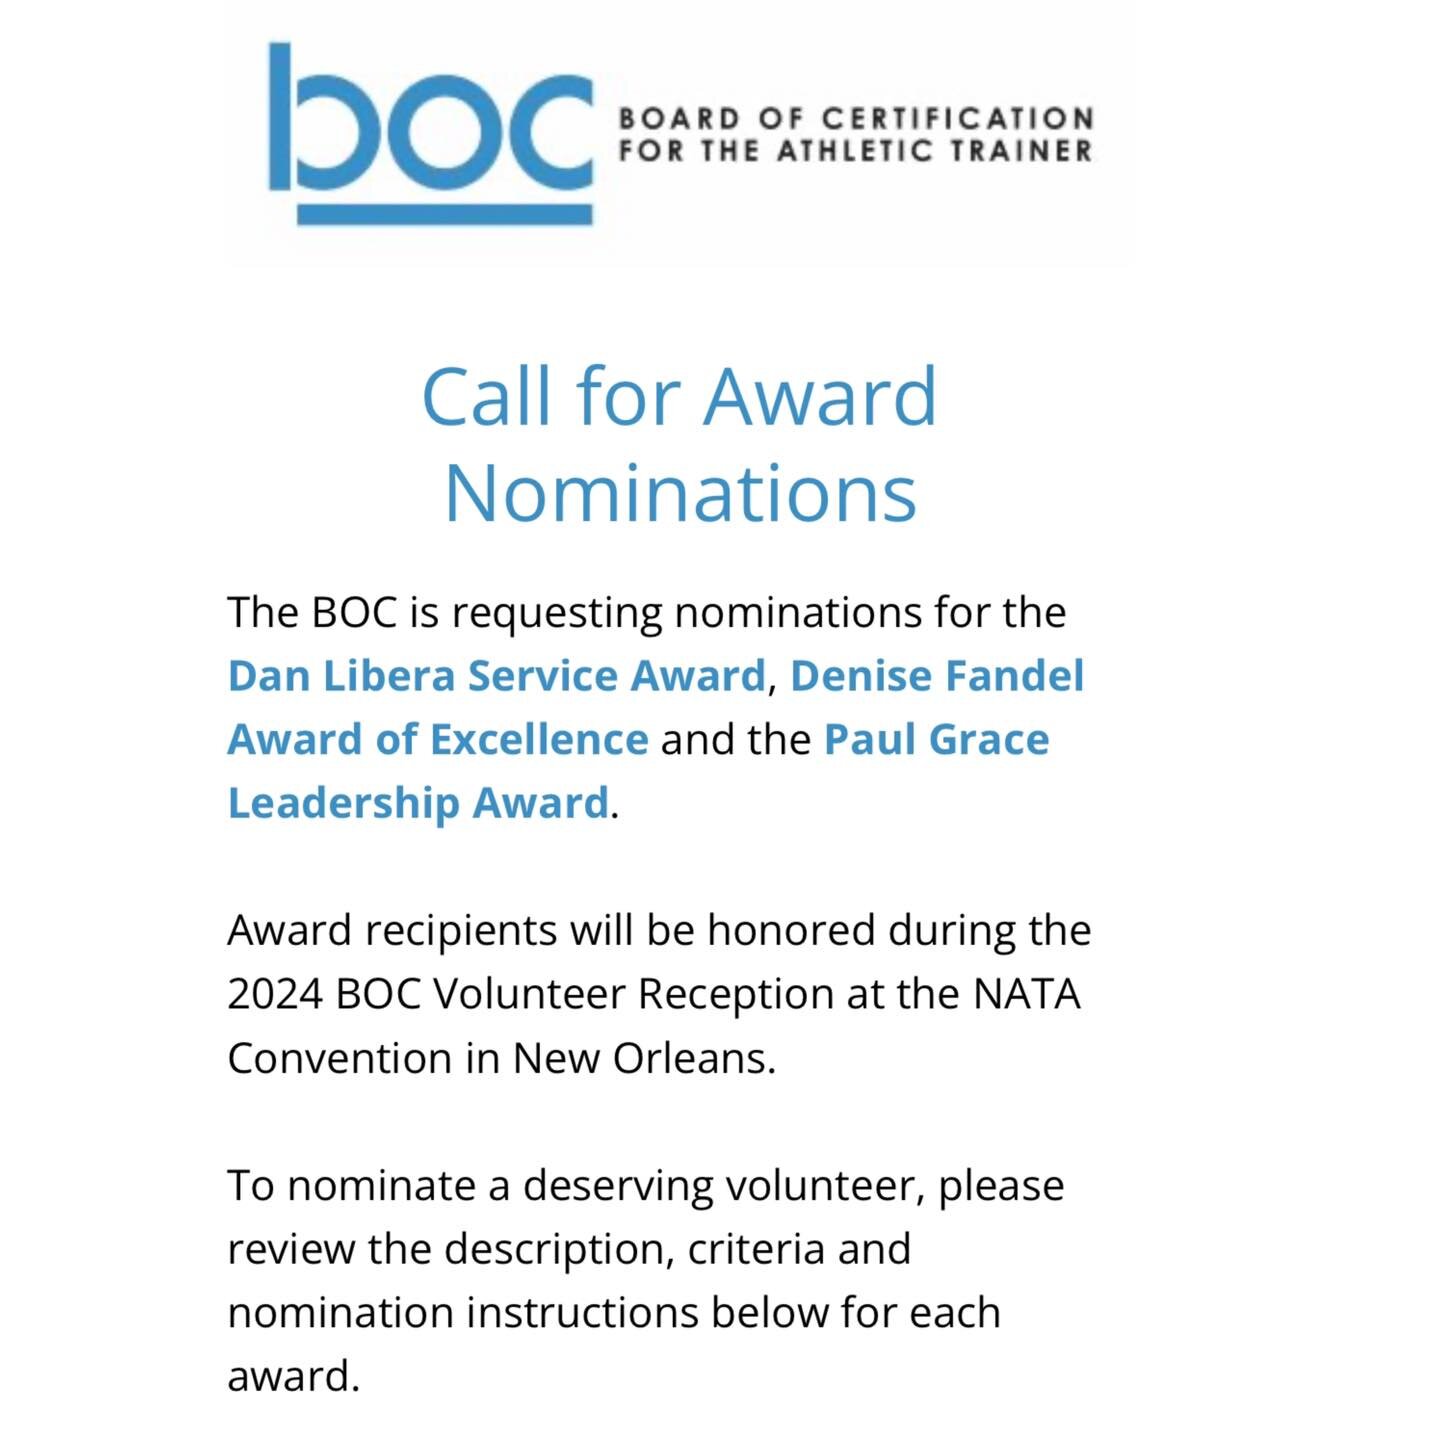 The BOC is requesting nominations for the Dan Libera Service Award, Denise Fandel Award of Excellence and the Paul Grace Leadership Award.

Award recipients will be honored during the 2024 BOC Volunteer Reception at the NATA Convention in New Orleans